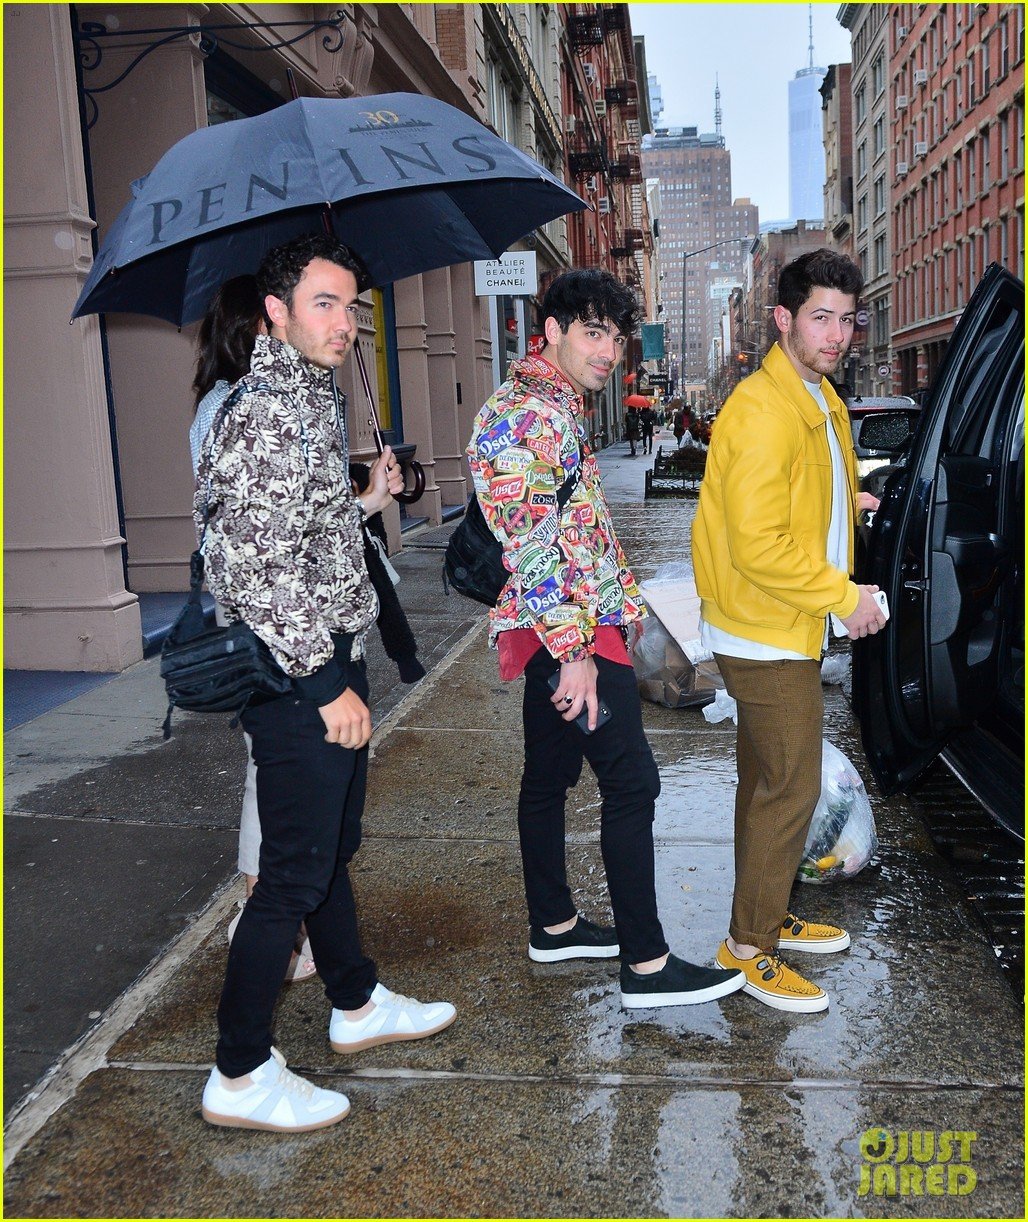 The Jonas Brothers Celebrate Their New Song in NYC! Photo 1226983